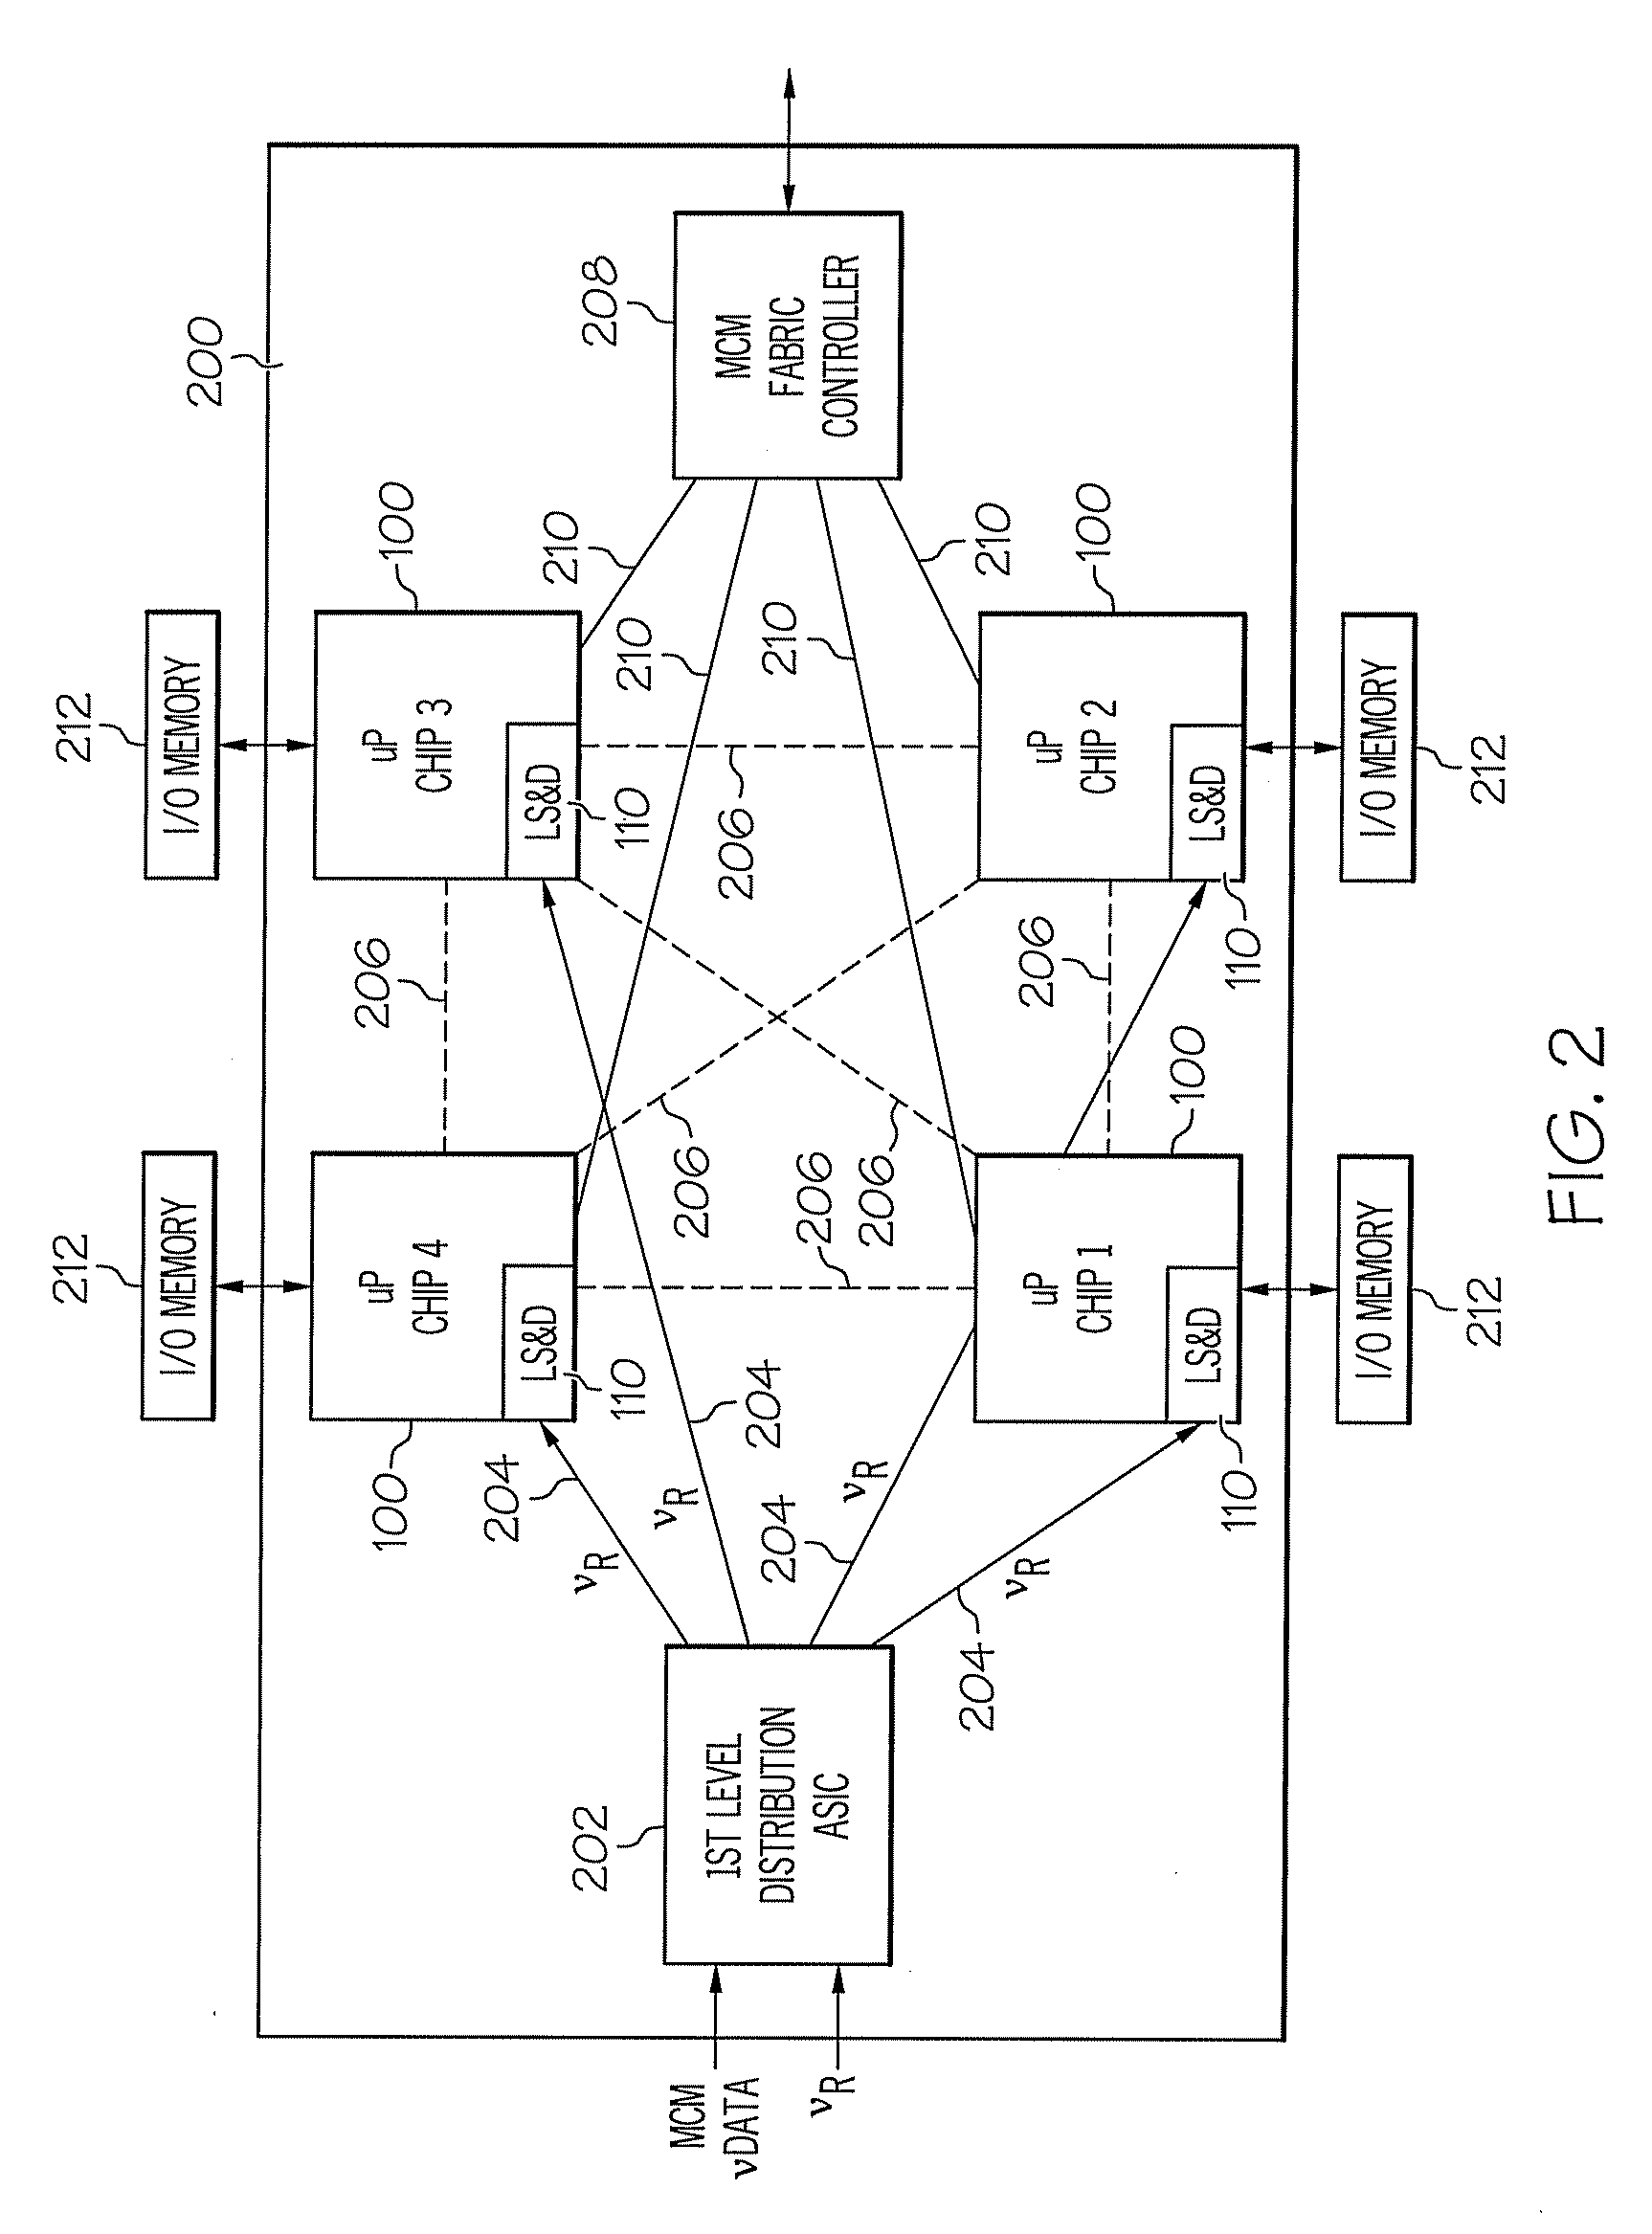 Methods and systems for digitally controlled multi-frequency clocking of multi-core processors